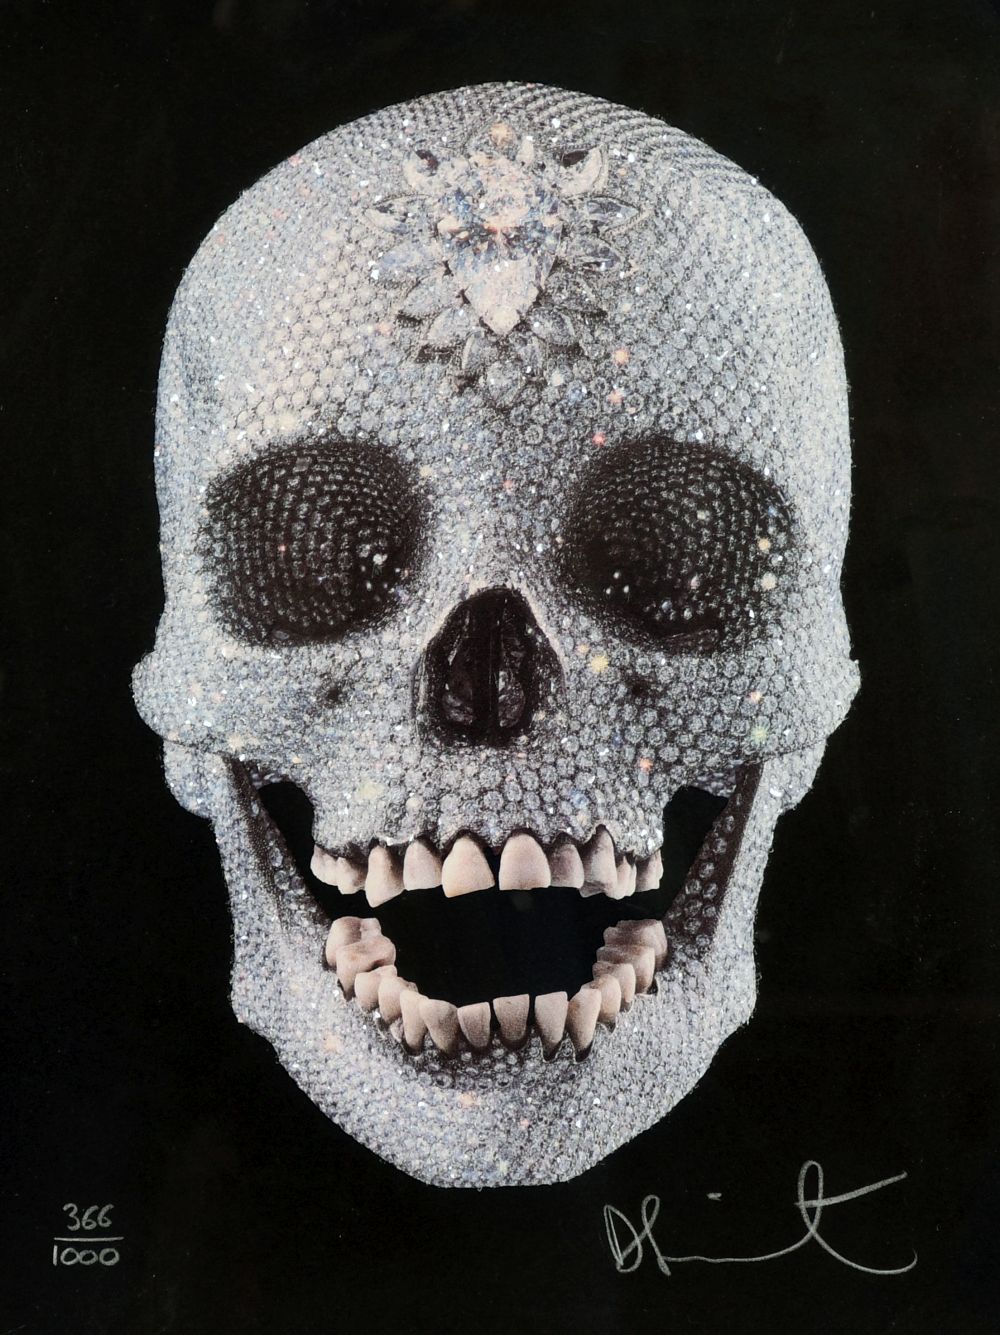 Damien Hirst, (B. 1965), "For the Love of God" Screenprint in colours with diamond dust on wove